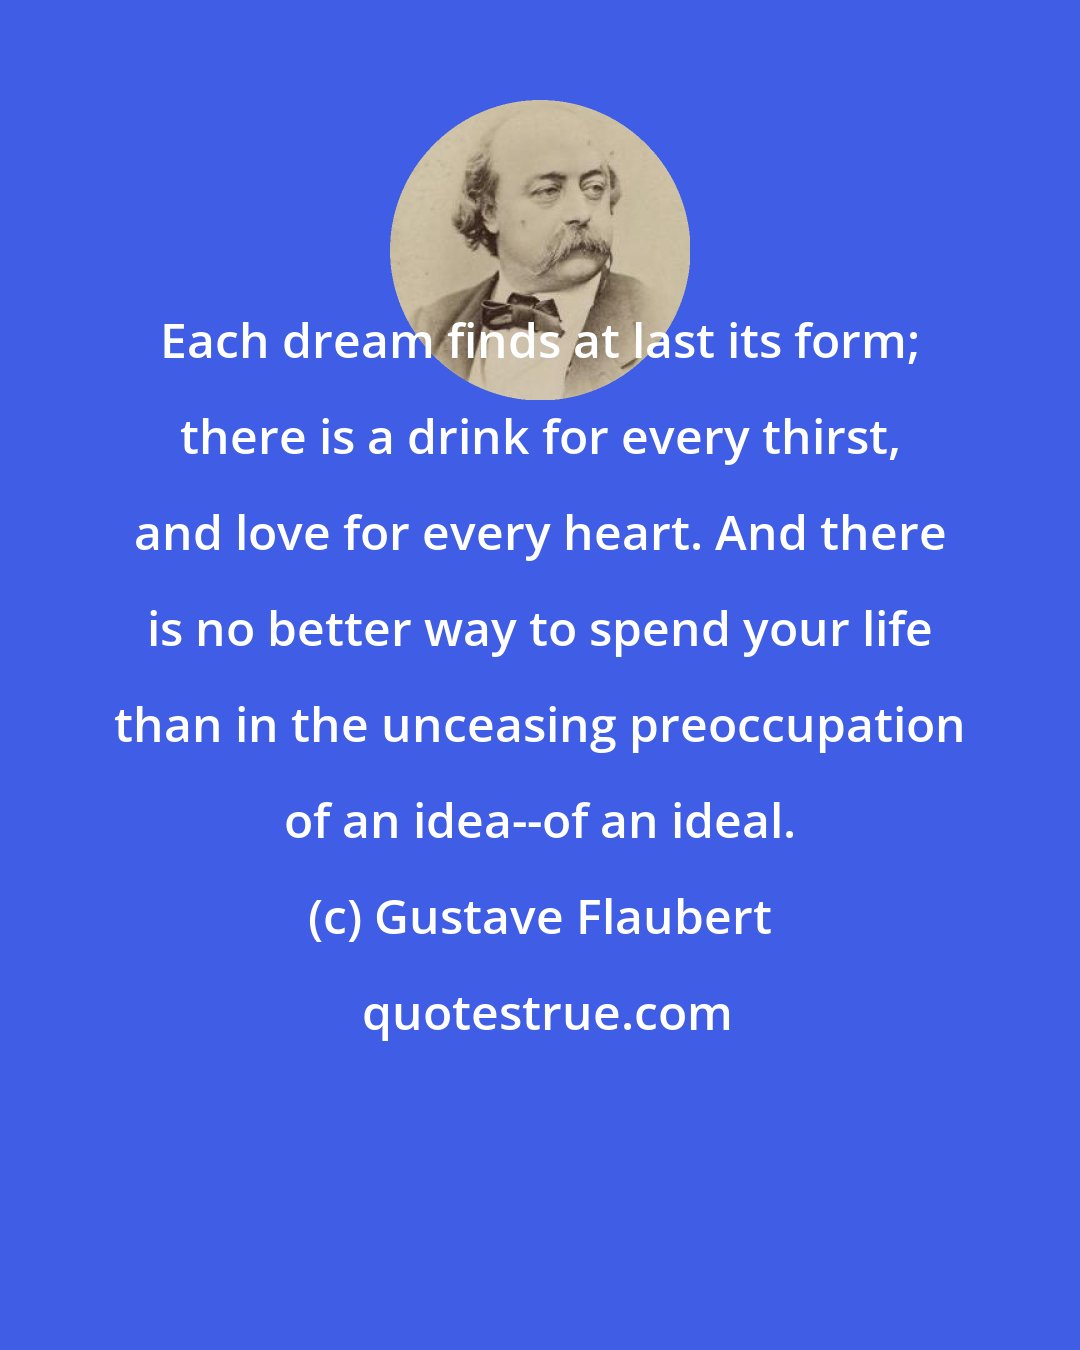 Gustave Flaubert: Each dream finds at last its form; there is a drink for every thirst, and love for every heart. And there is no better way to spend your life than in the unceasing preoccupation of an idea--of an ideal.